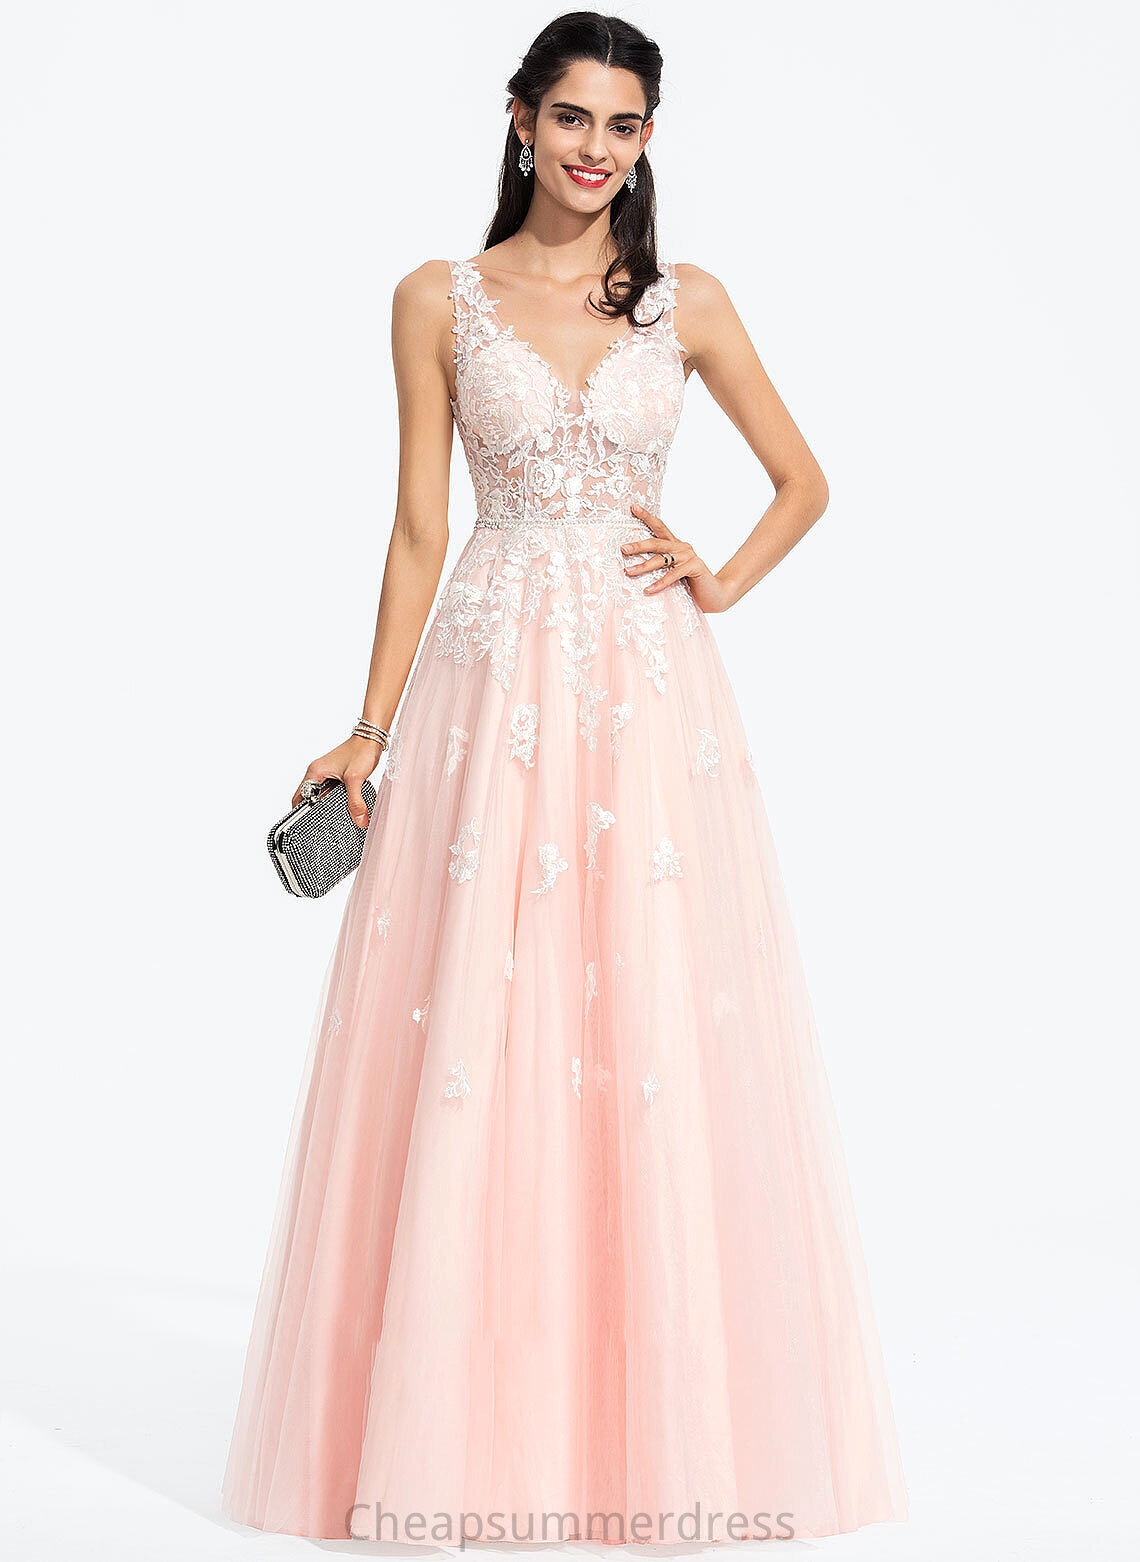 Wedding Floor-Length Beading Ball-Gown/Princess V-neck With Sequins Wedding Dresses Marianna Tulle Dress